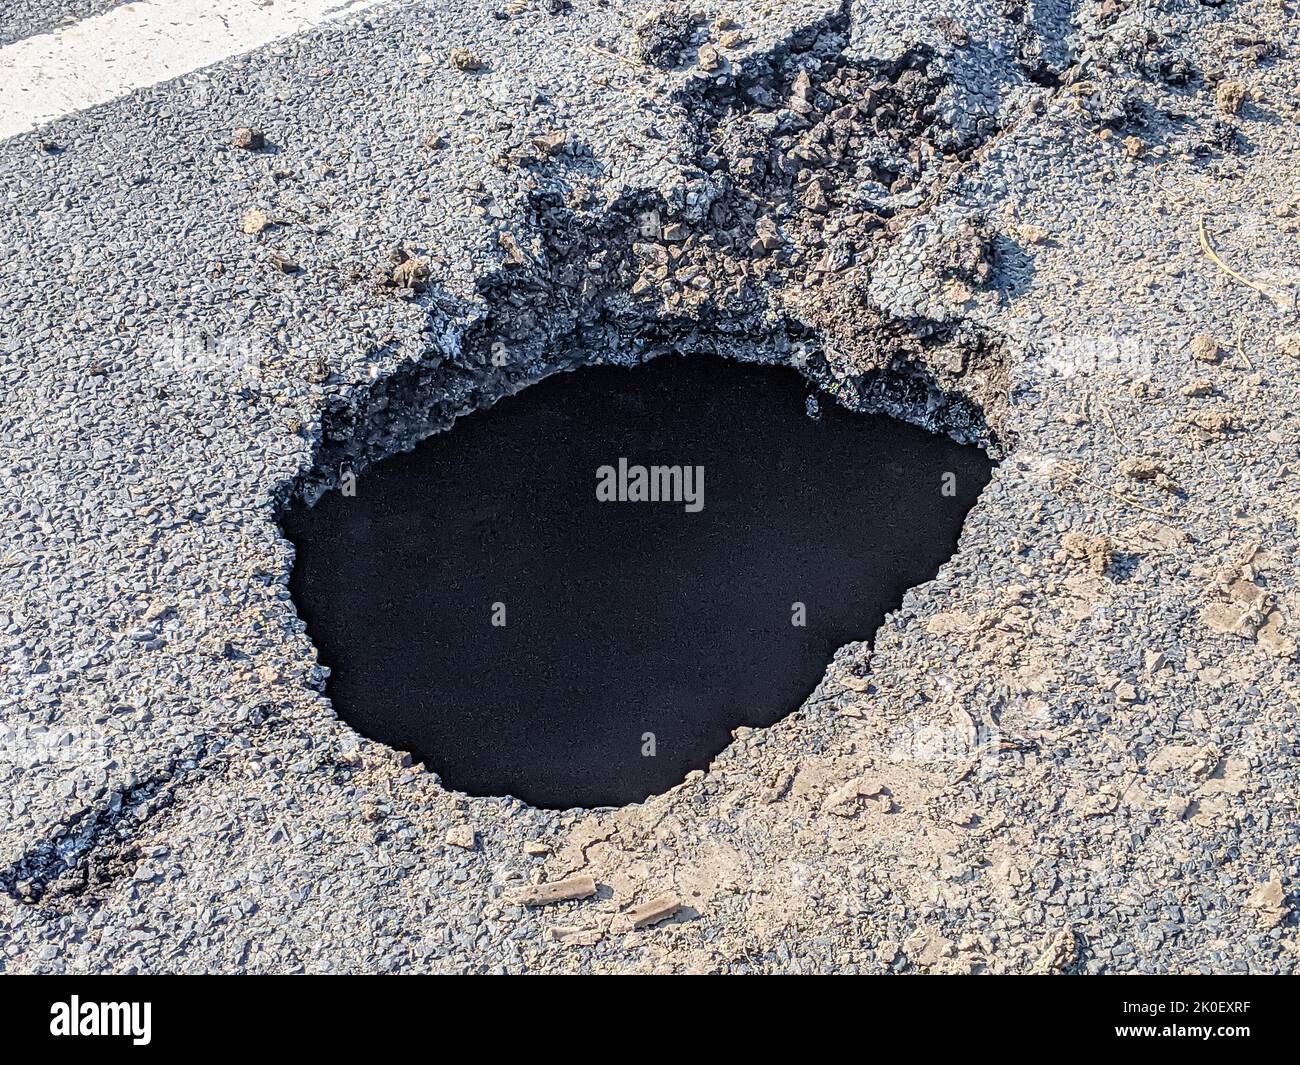 Deep sink hole opened up in a tarmac road surface. Stock Photo